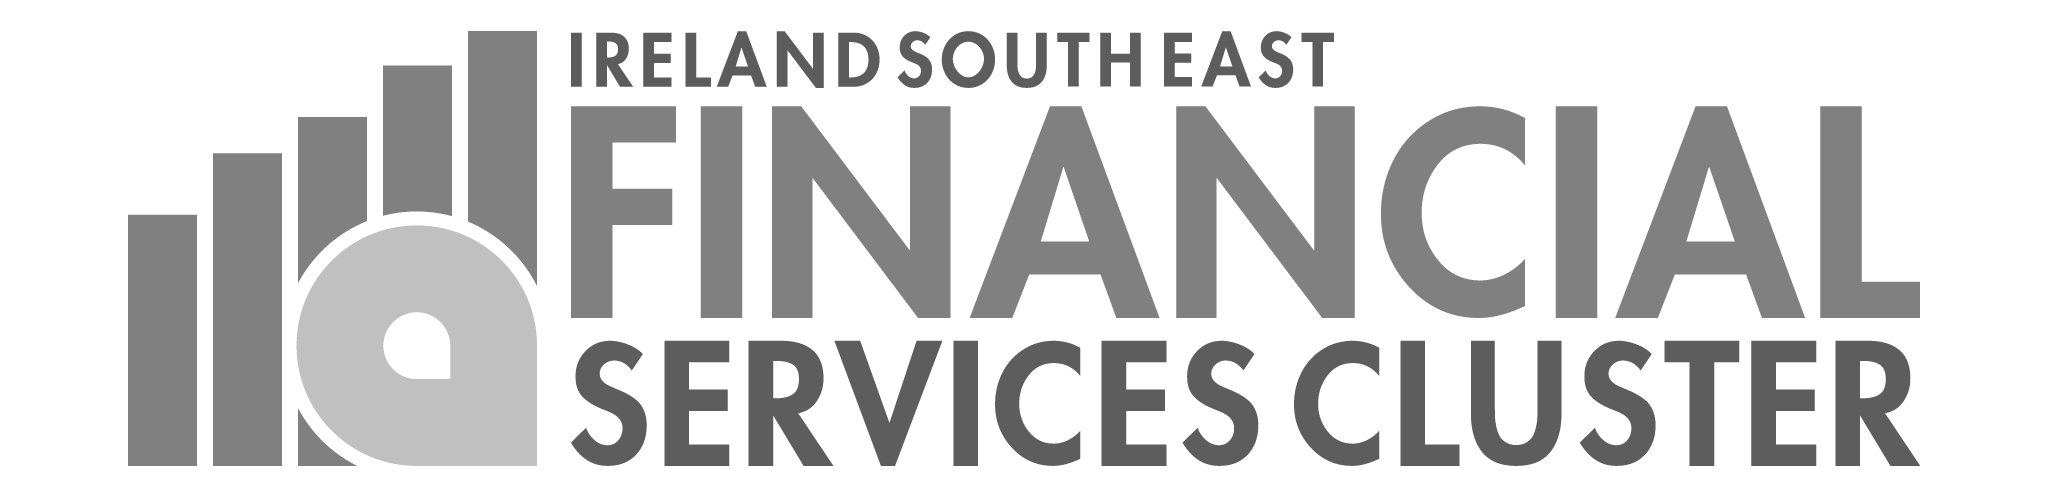 Ireland Southeast Financial Services Cluster